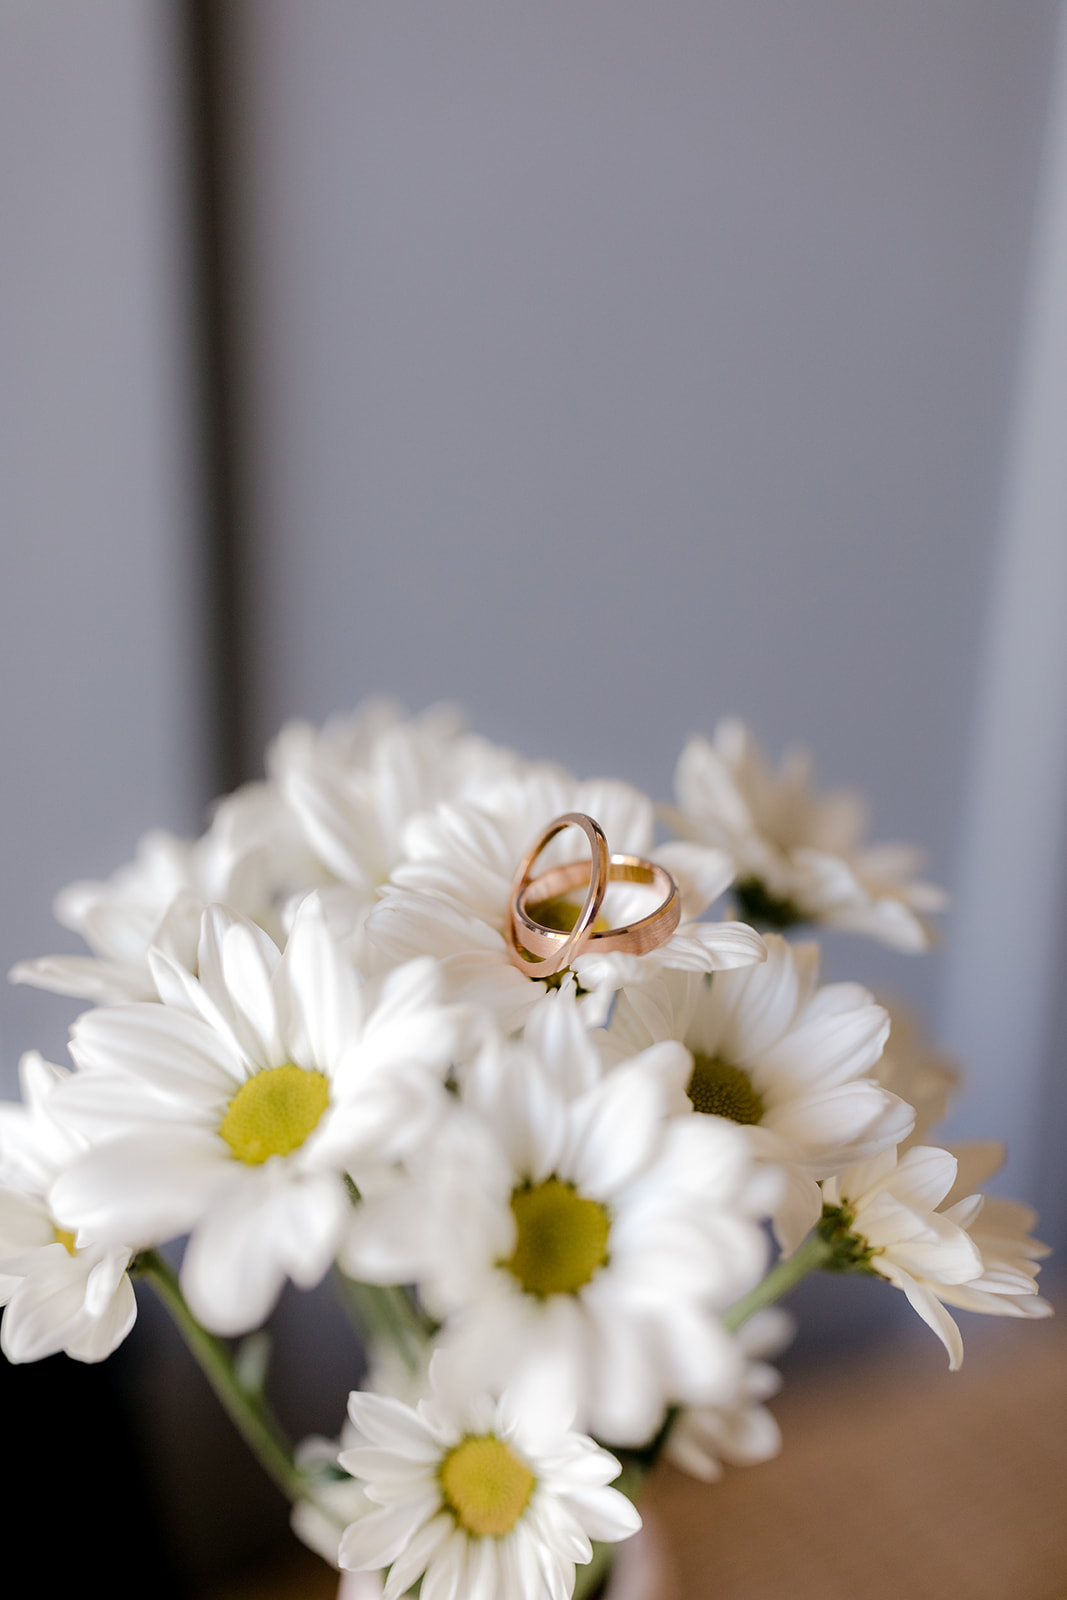 Close-up of wedding rings in flowers for an elegant country wedding.